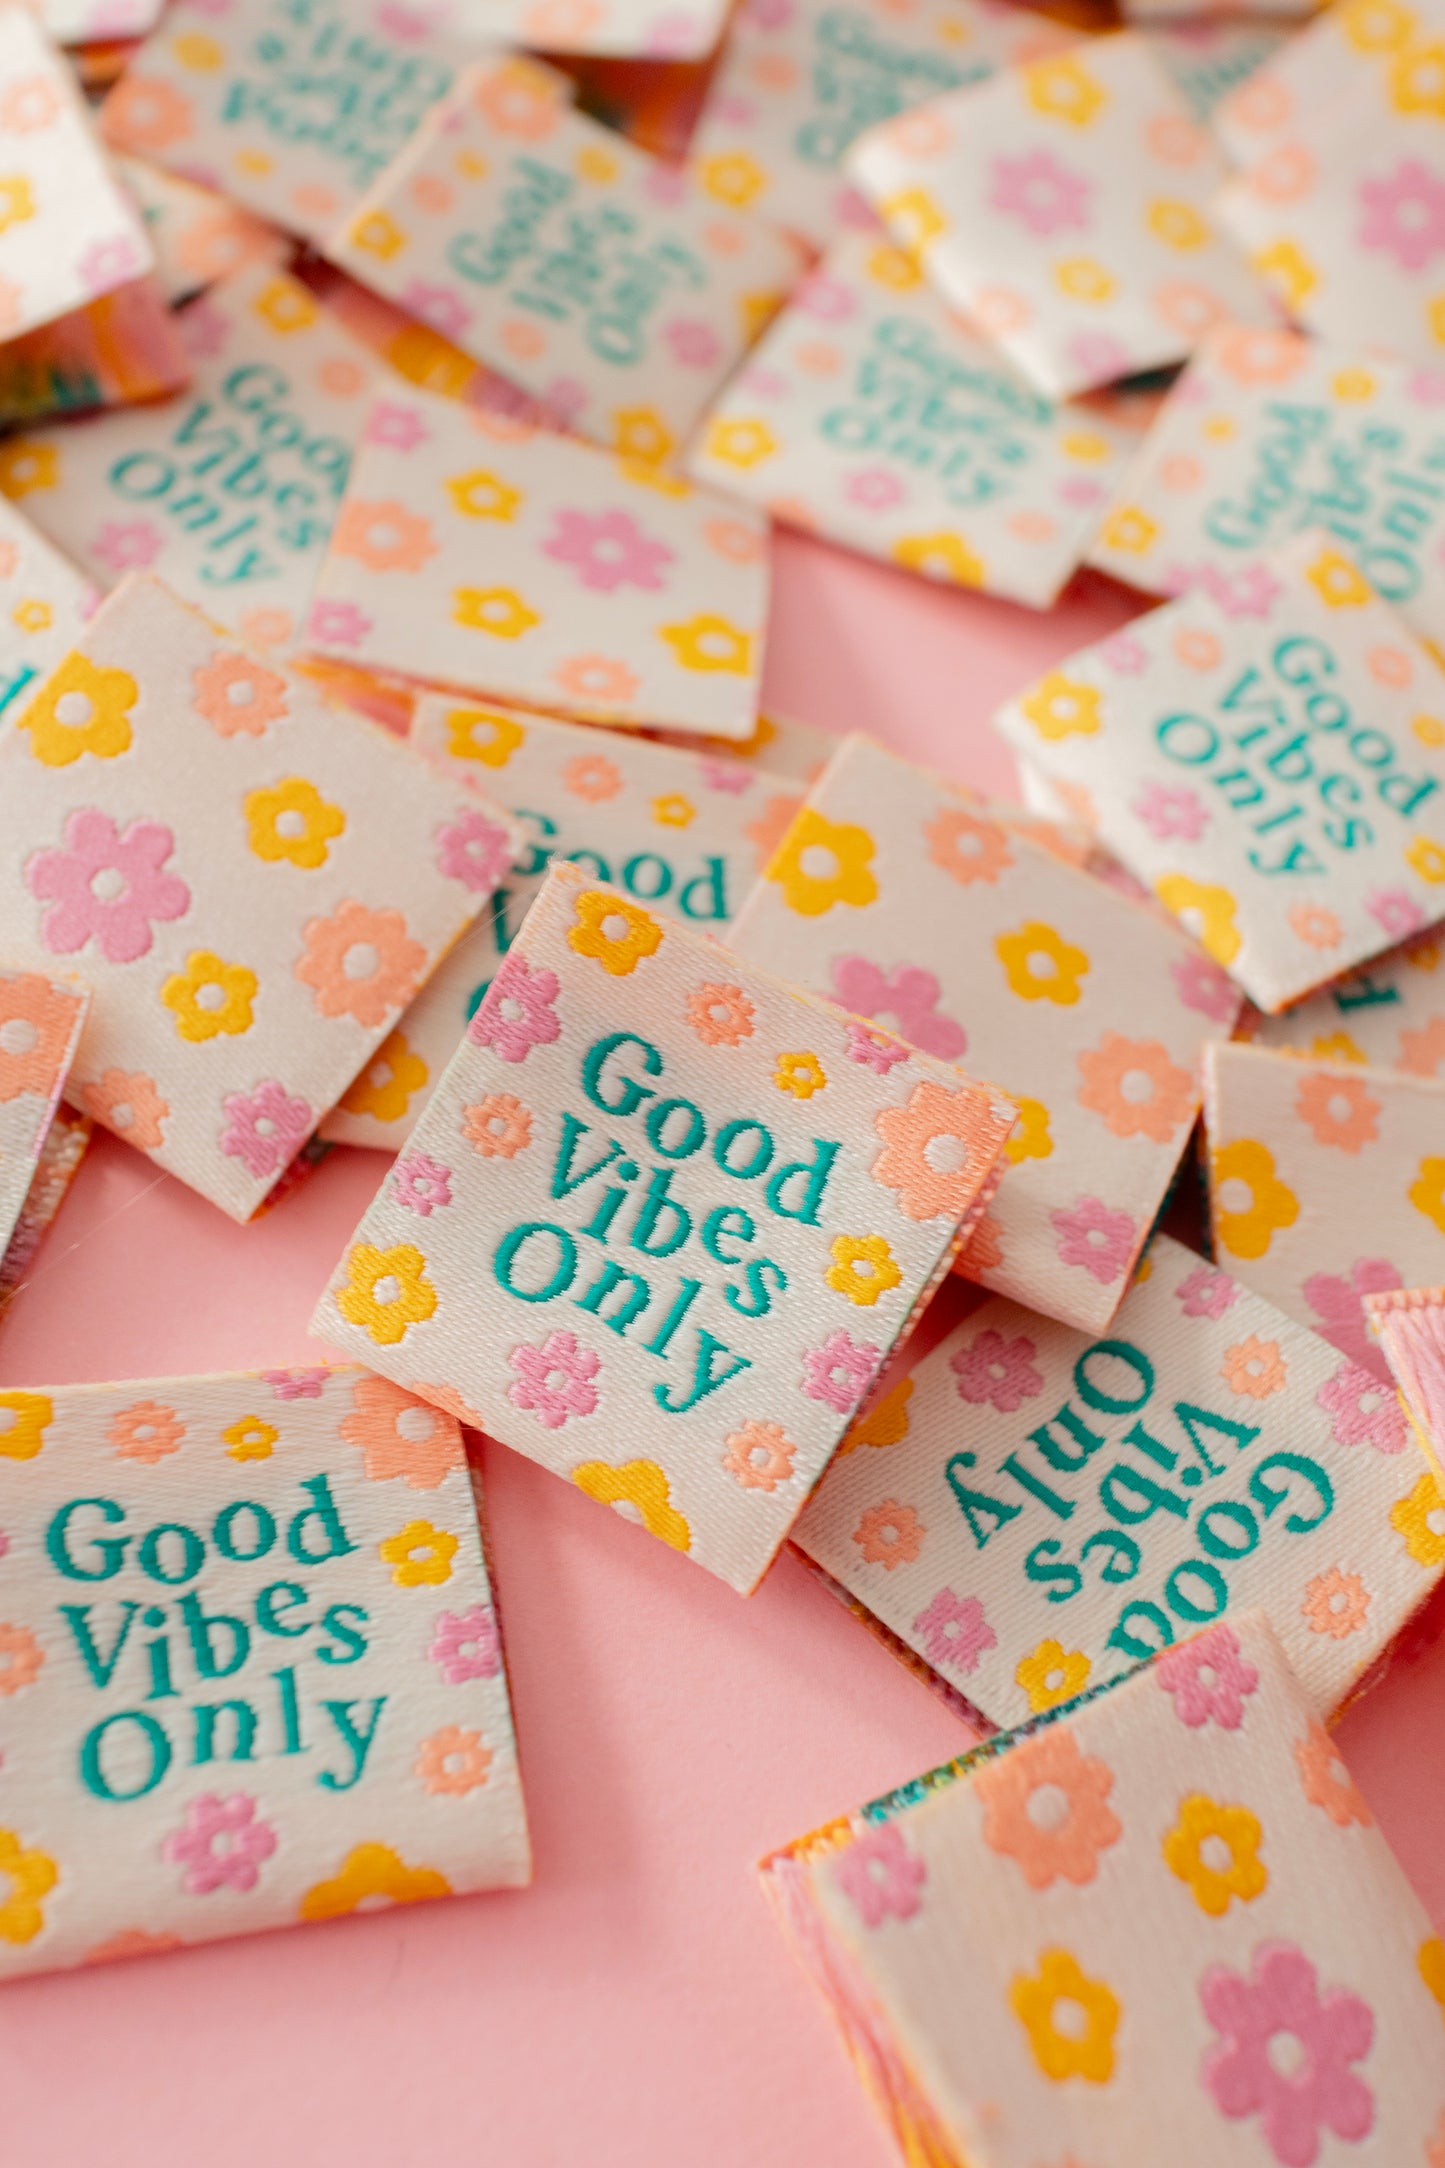 X6 Original Paige Joanna Woven Clothing Labels | Good Vibes Only Design